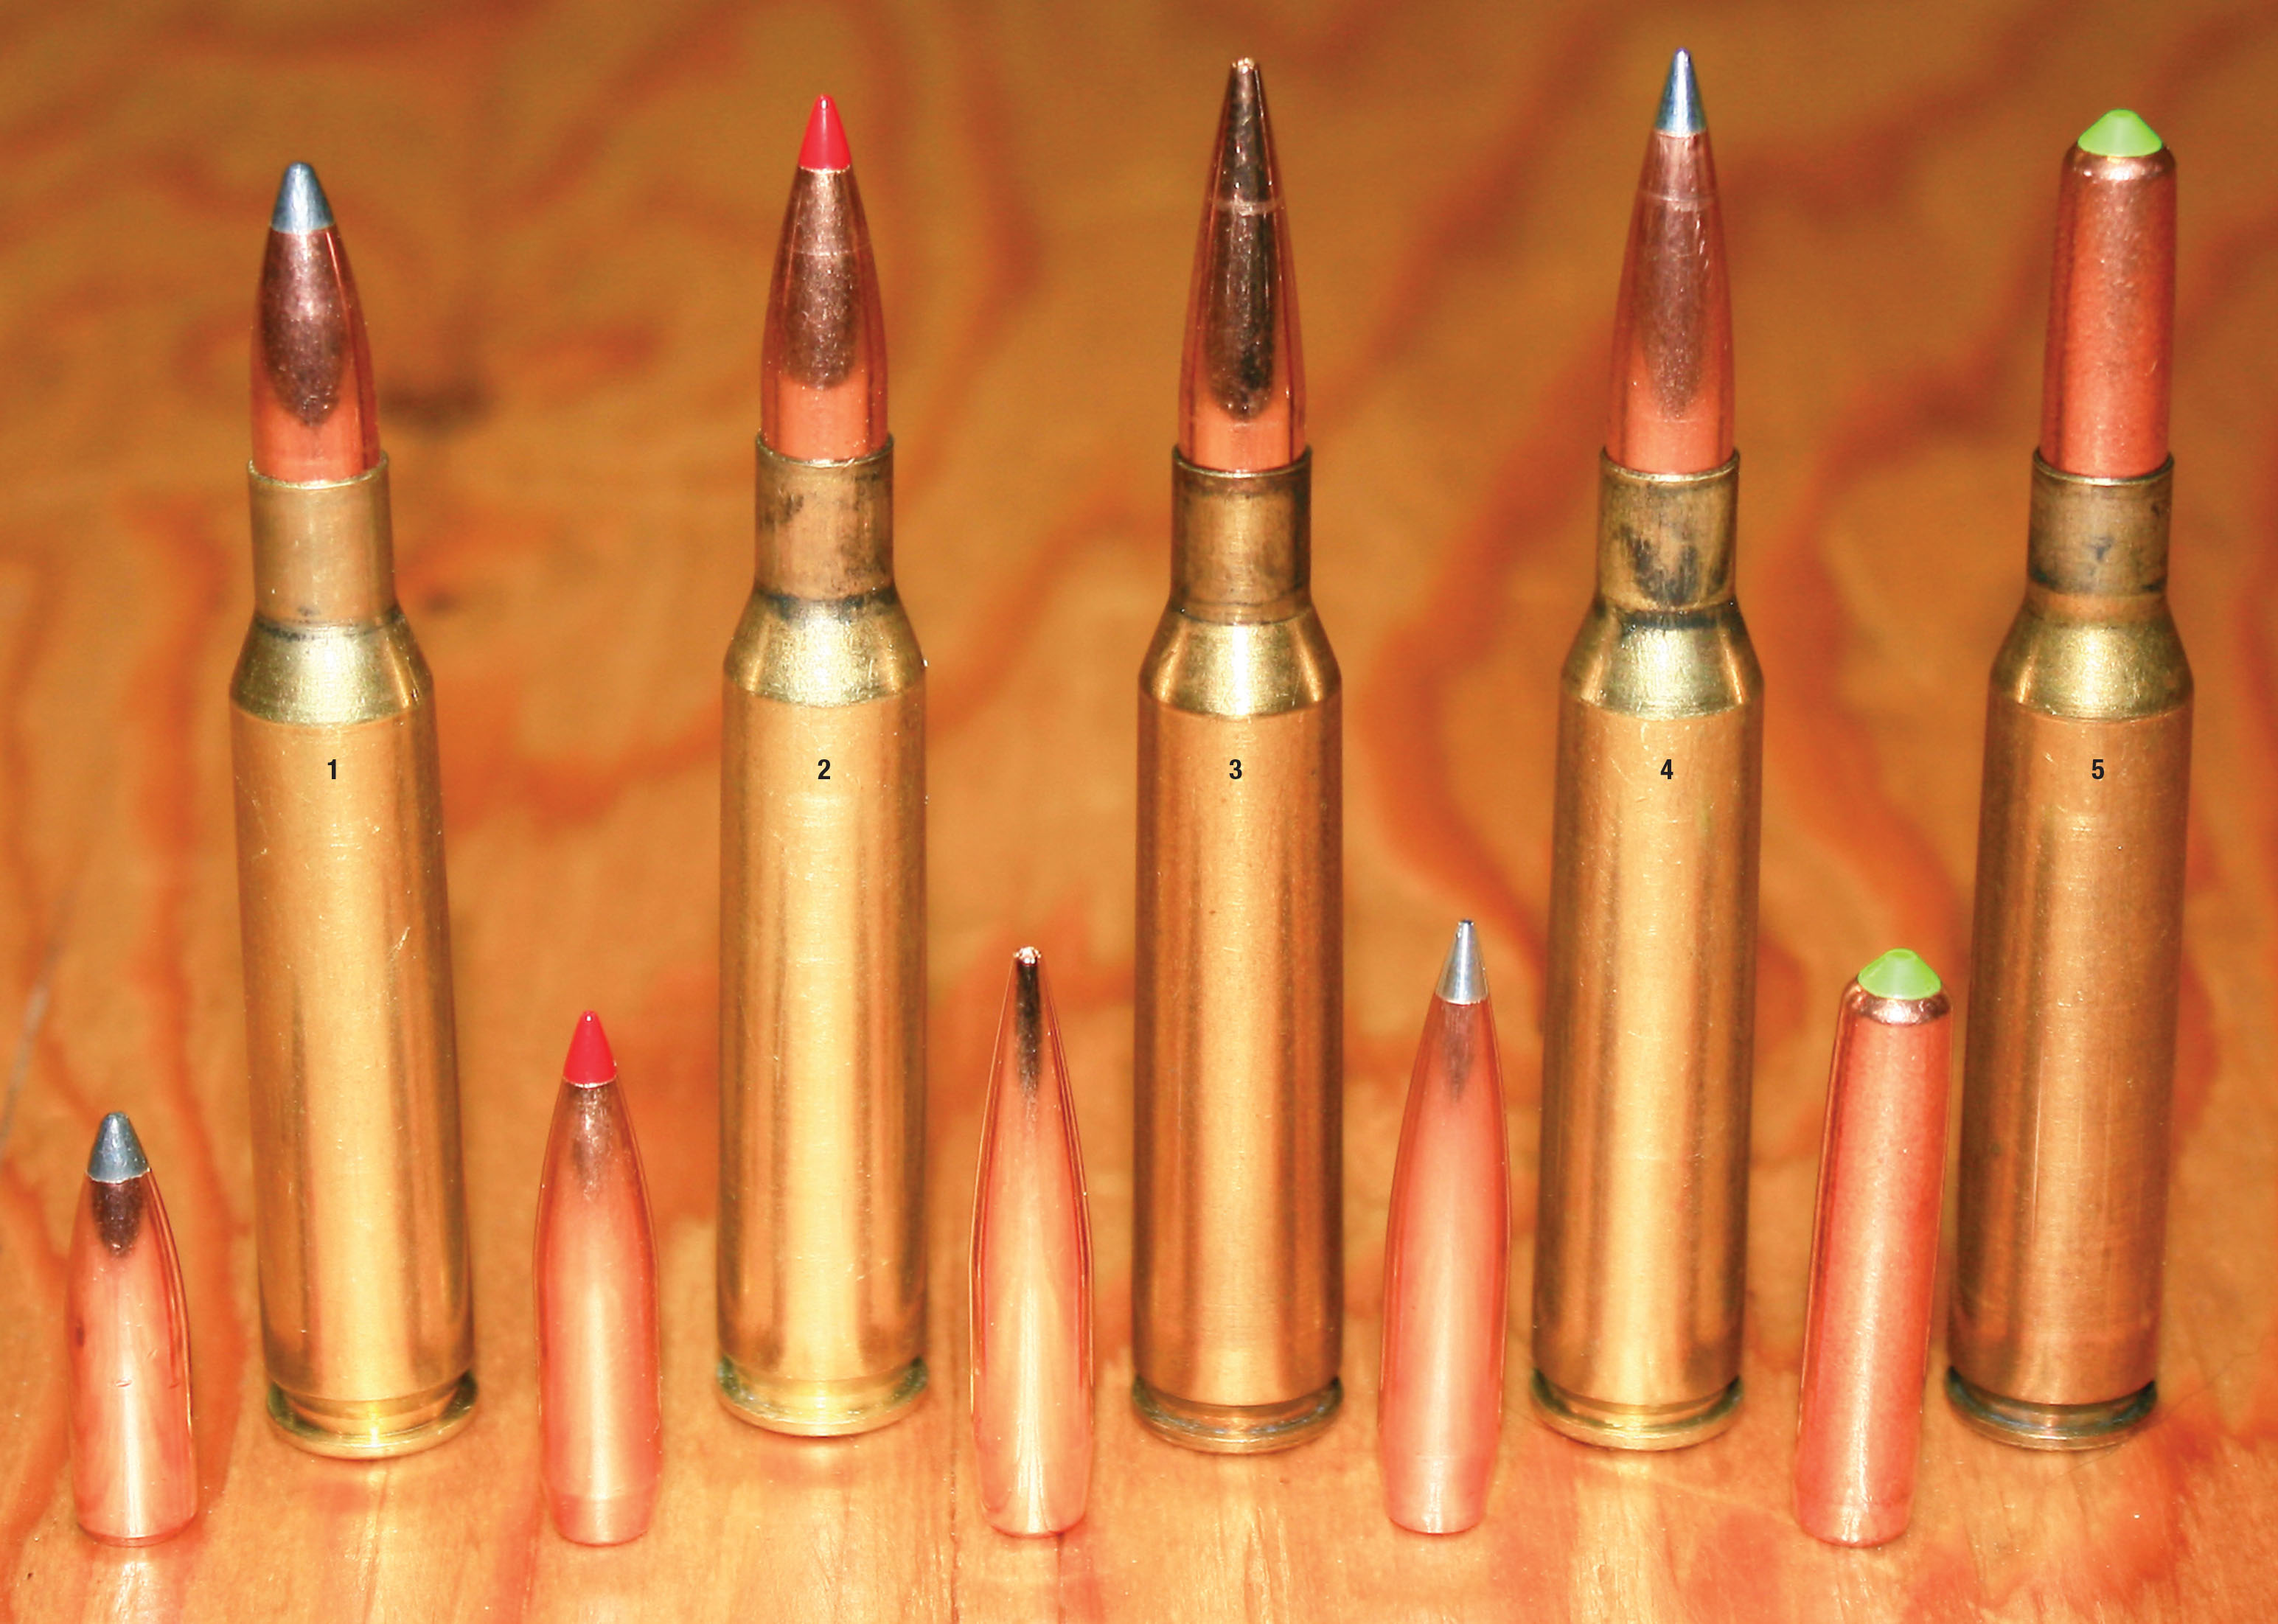 Bullets selected for testing the 6.5x57mm Mauser included the (1) Nosler 100-grain Partition, (2) Hornady 120-grain ELD Match, (3) Berger 130-grain VLD Hunting, (4) Hornady 135-grain A-Tip and the (5) Lapua 140-grain CEX Naturalis.